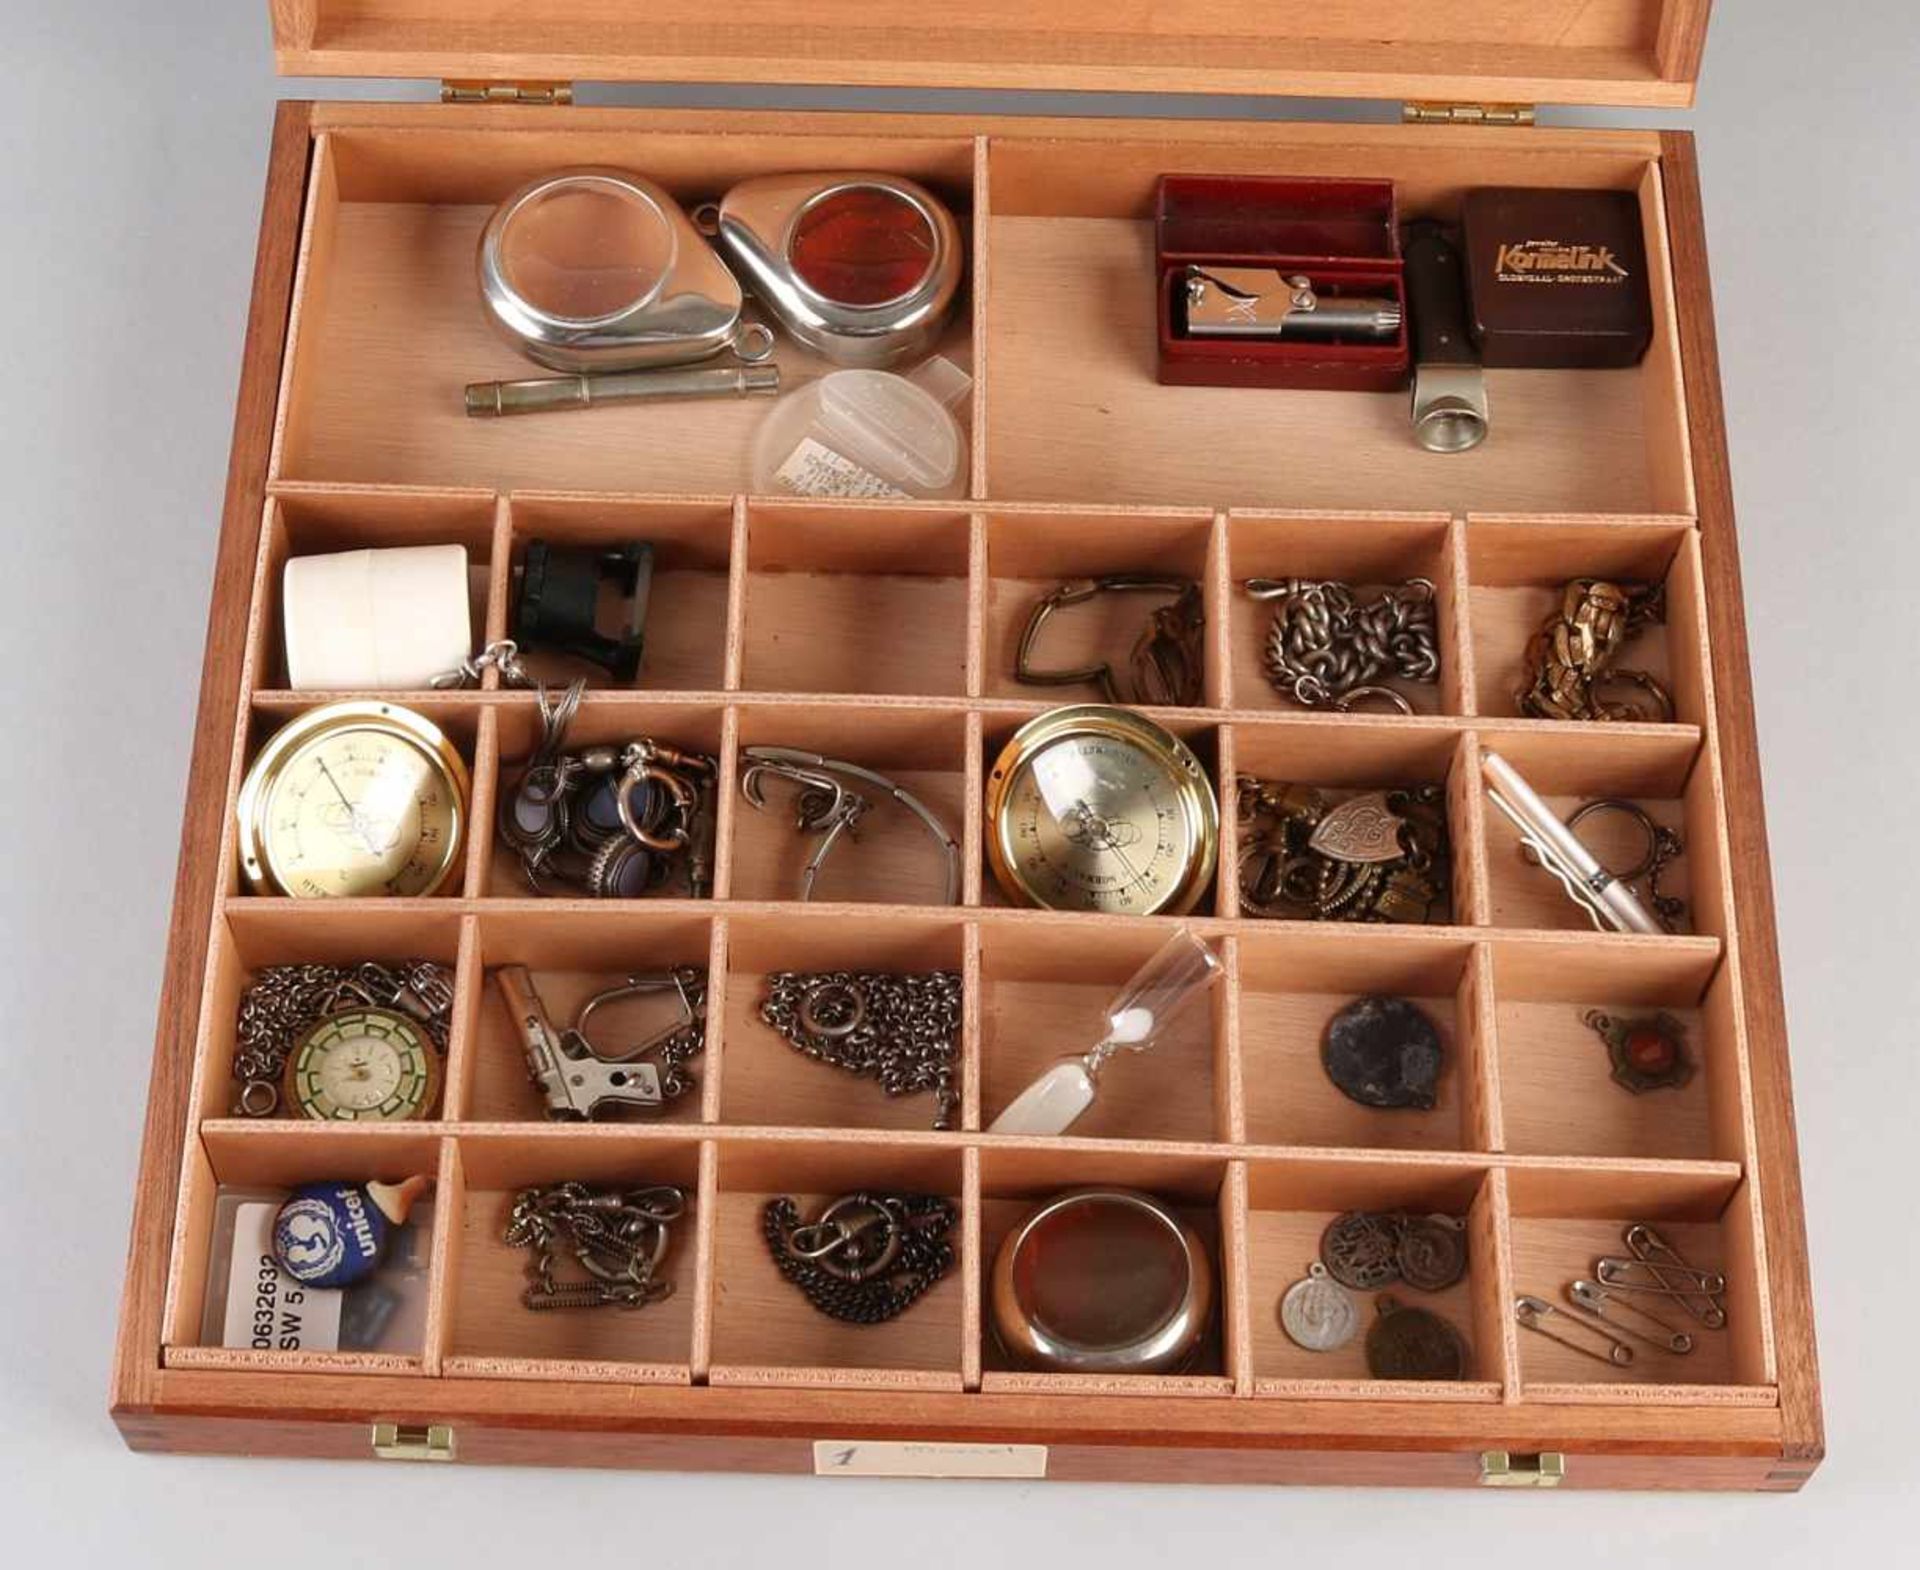 Box miscellaneous. Watches, watch chains, coins, shells, jewelry loupe et cetera. Size: 45 x 33 x